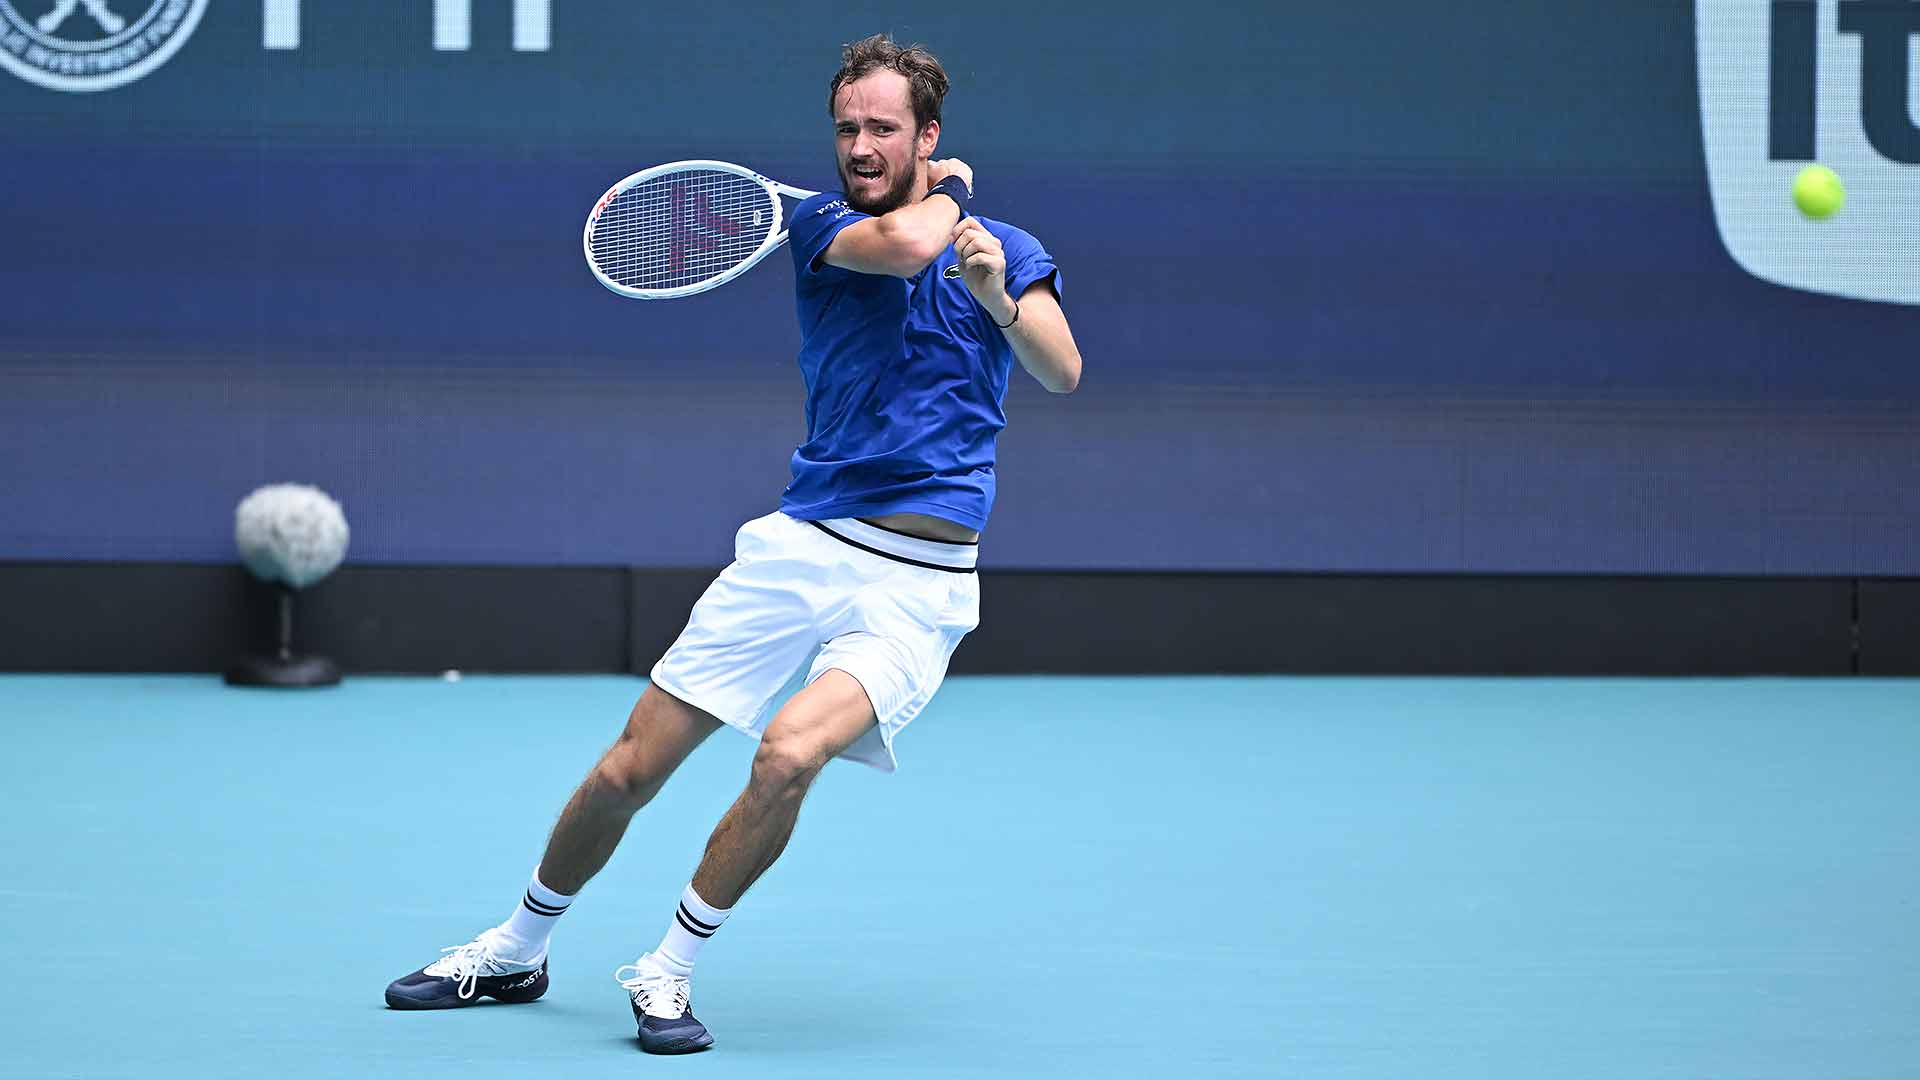 Daniil Medvedev has made an art form of returning deep in the court.